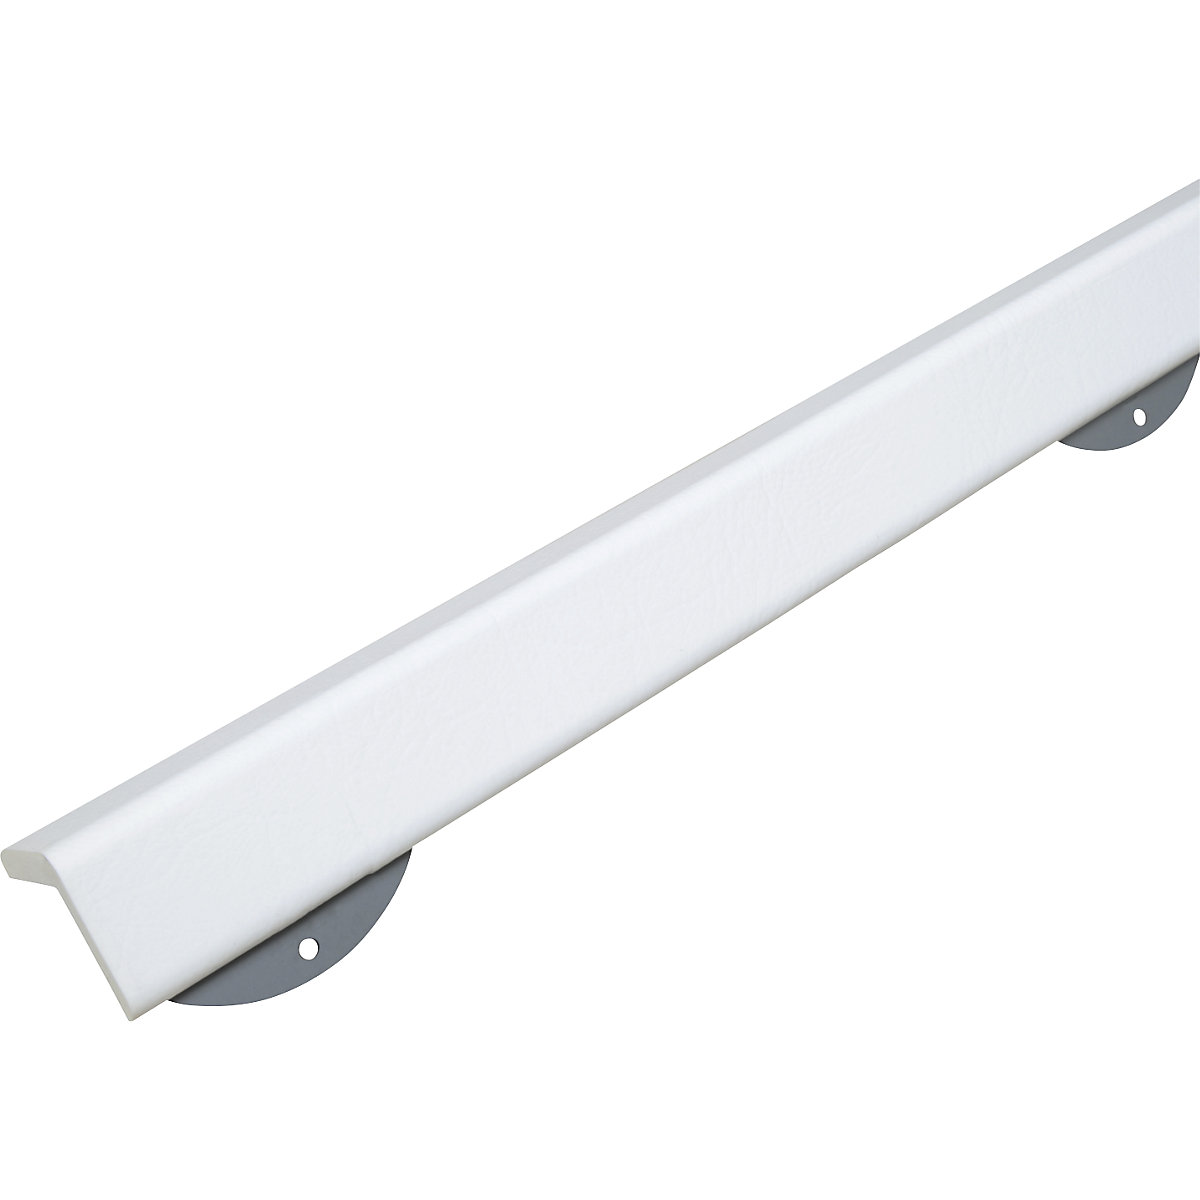 Knuffi® corner protection with mounting rail – SHG